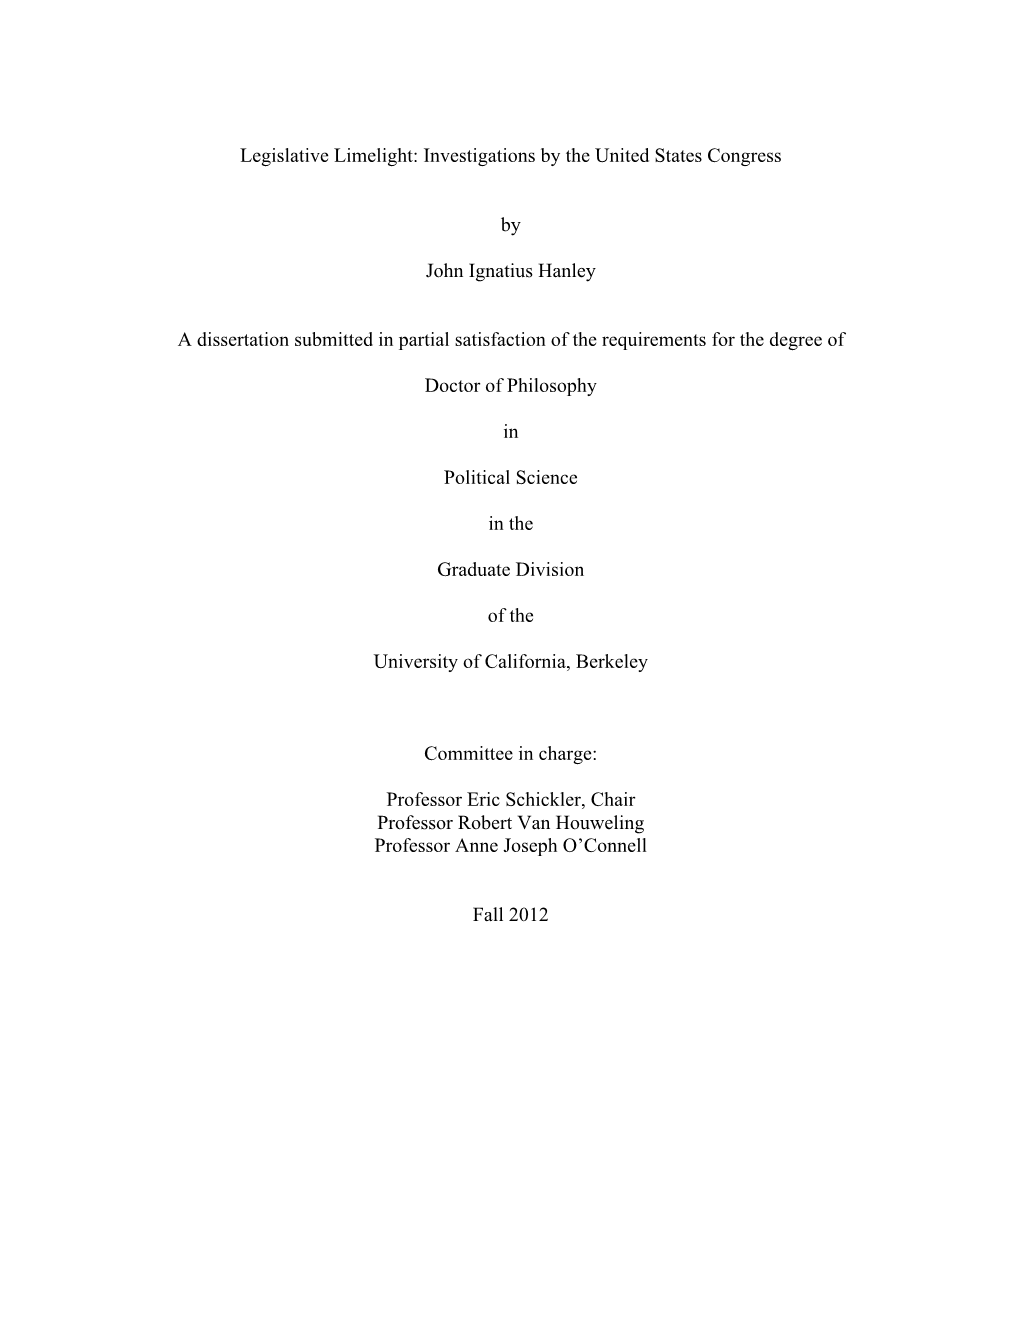 Legislative Limelight: Investigations by the United States Congress by John Ignatius Hanley a Dissertation Submitted in Partial